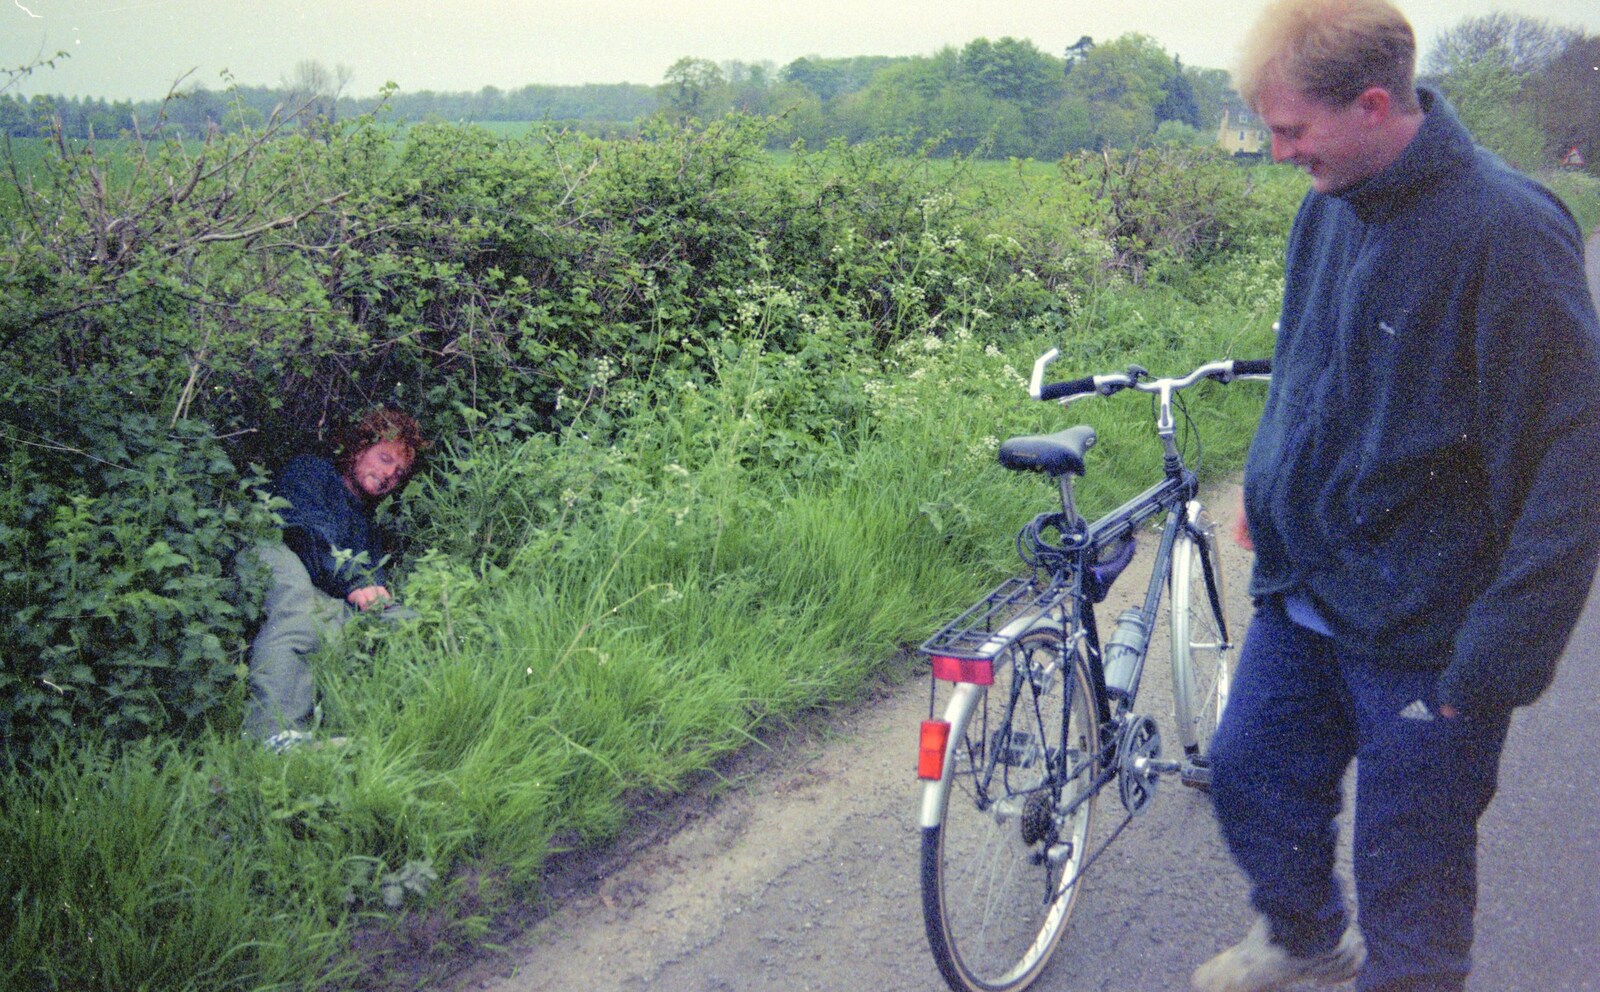 Paul comes along to see what's occuring from A BSCC Bike Ride, Brockdish Greyhound and Hoxne Swan, Suffolk - 4th May 2000